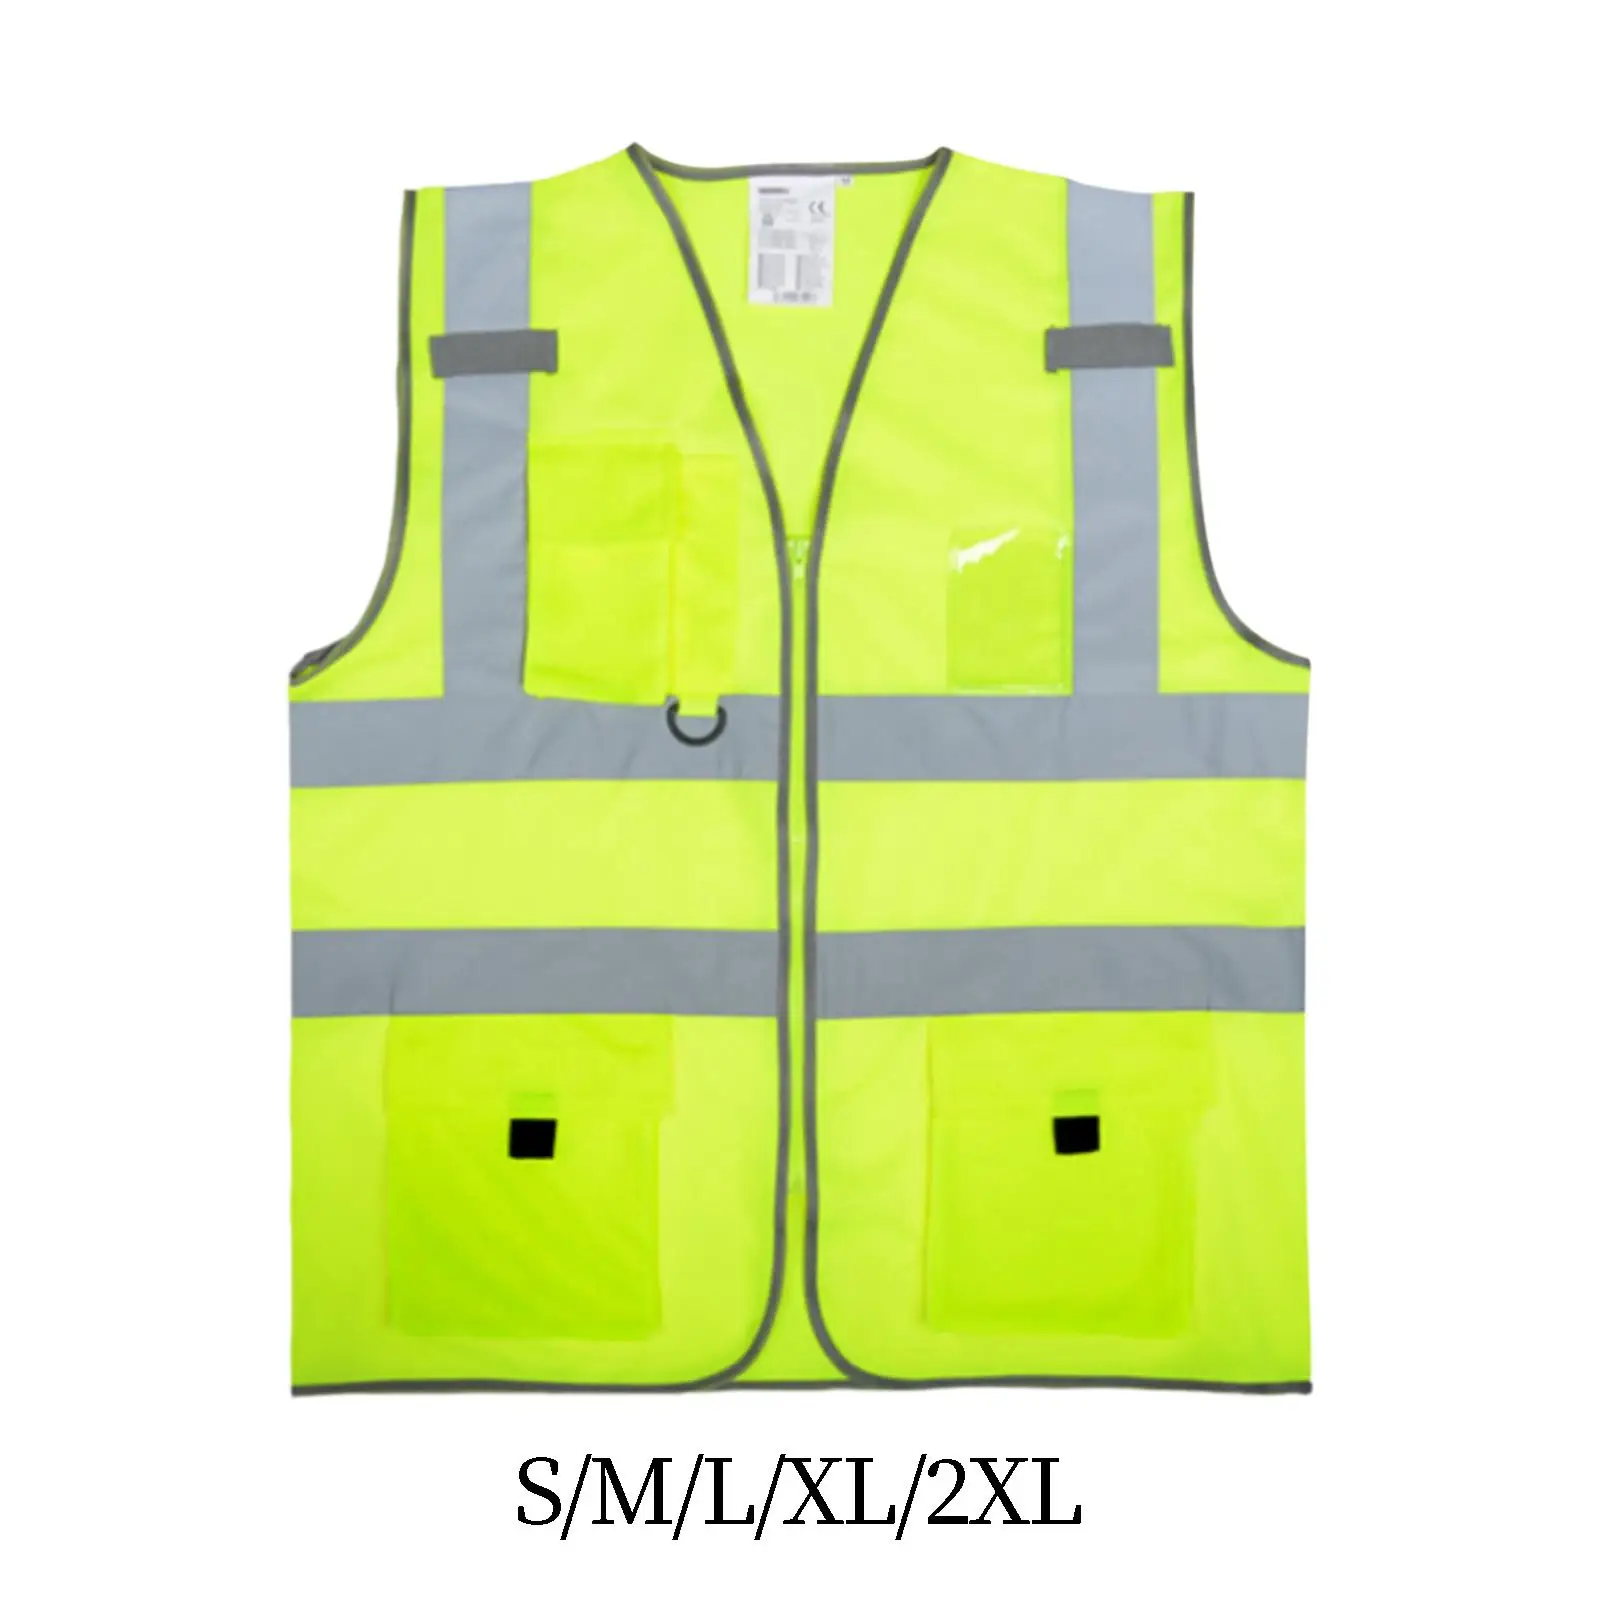 Reflective Vest Multi Pocket Highlight Reflective Safety Jacket Engineer Vest for Racing Running Sports Workers Construction